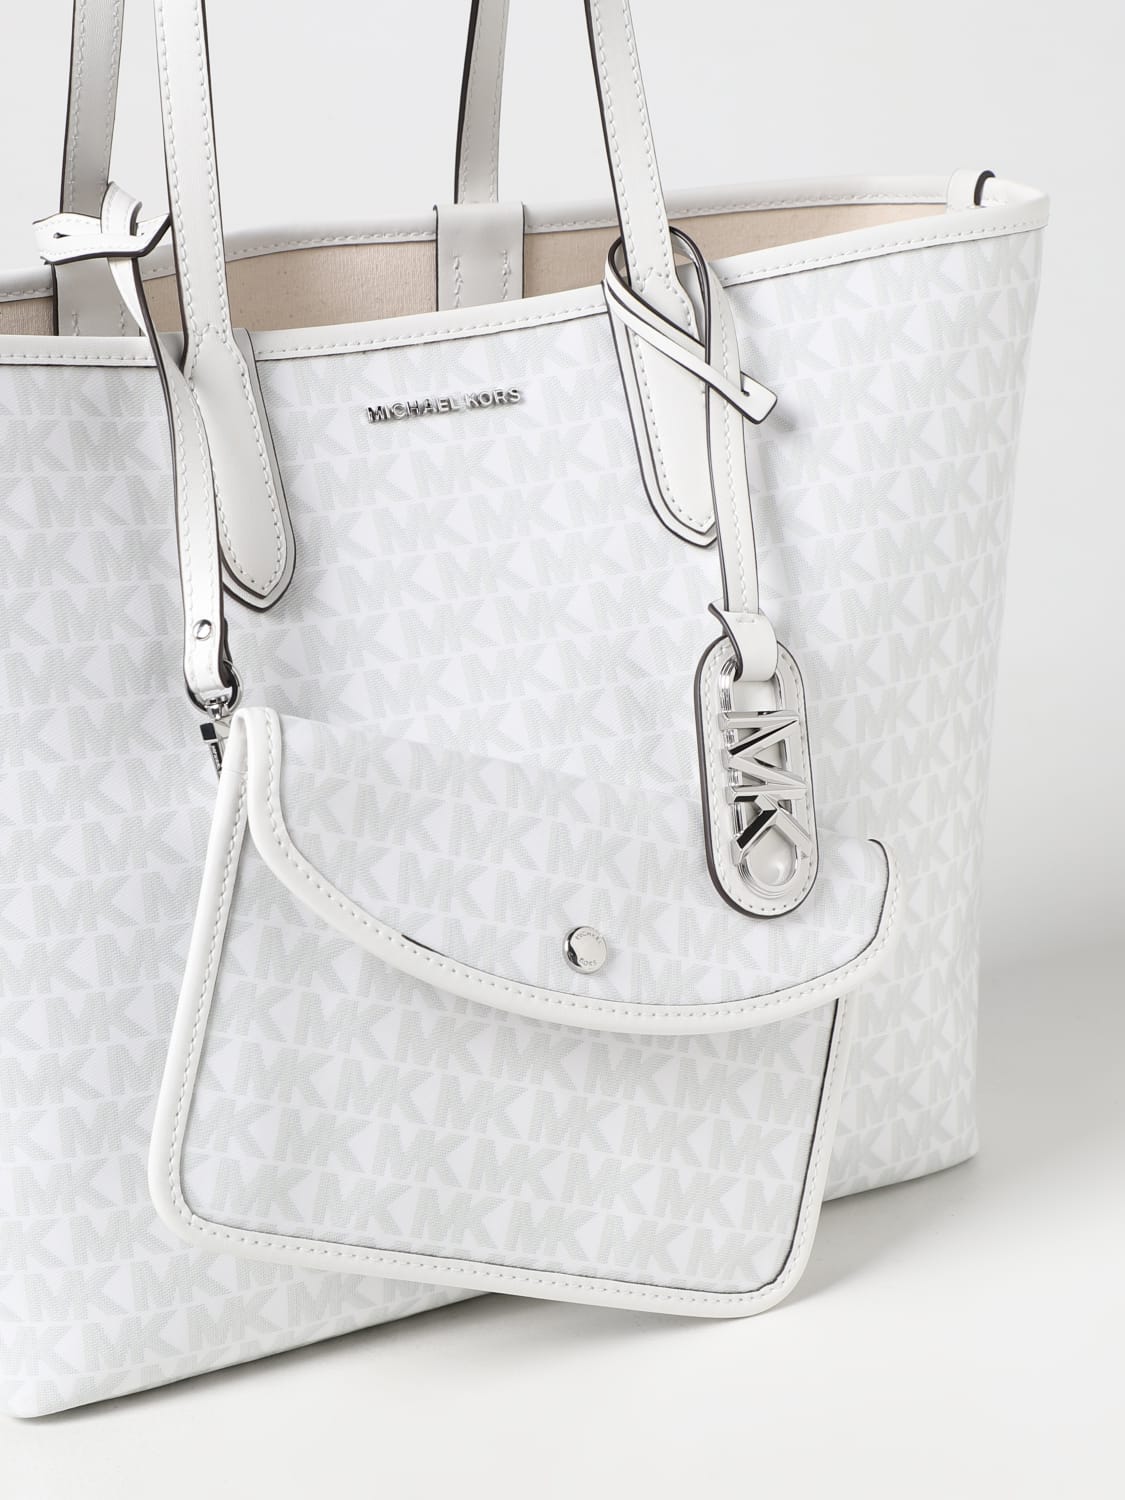 MICHAEL KORS: Michael bag in coated fabric with all over MK